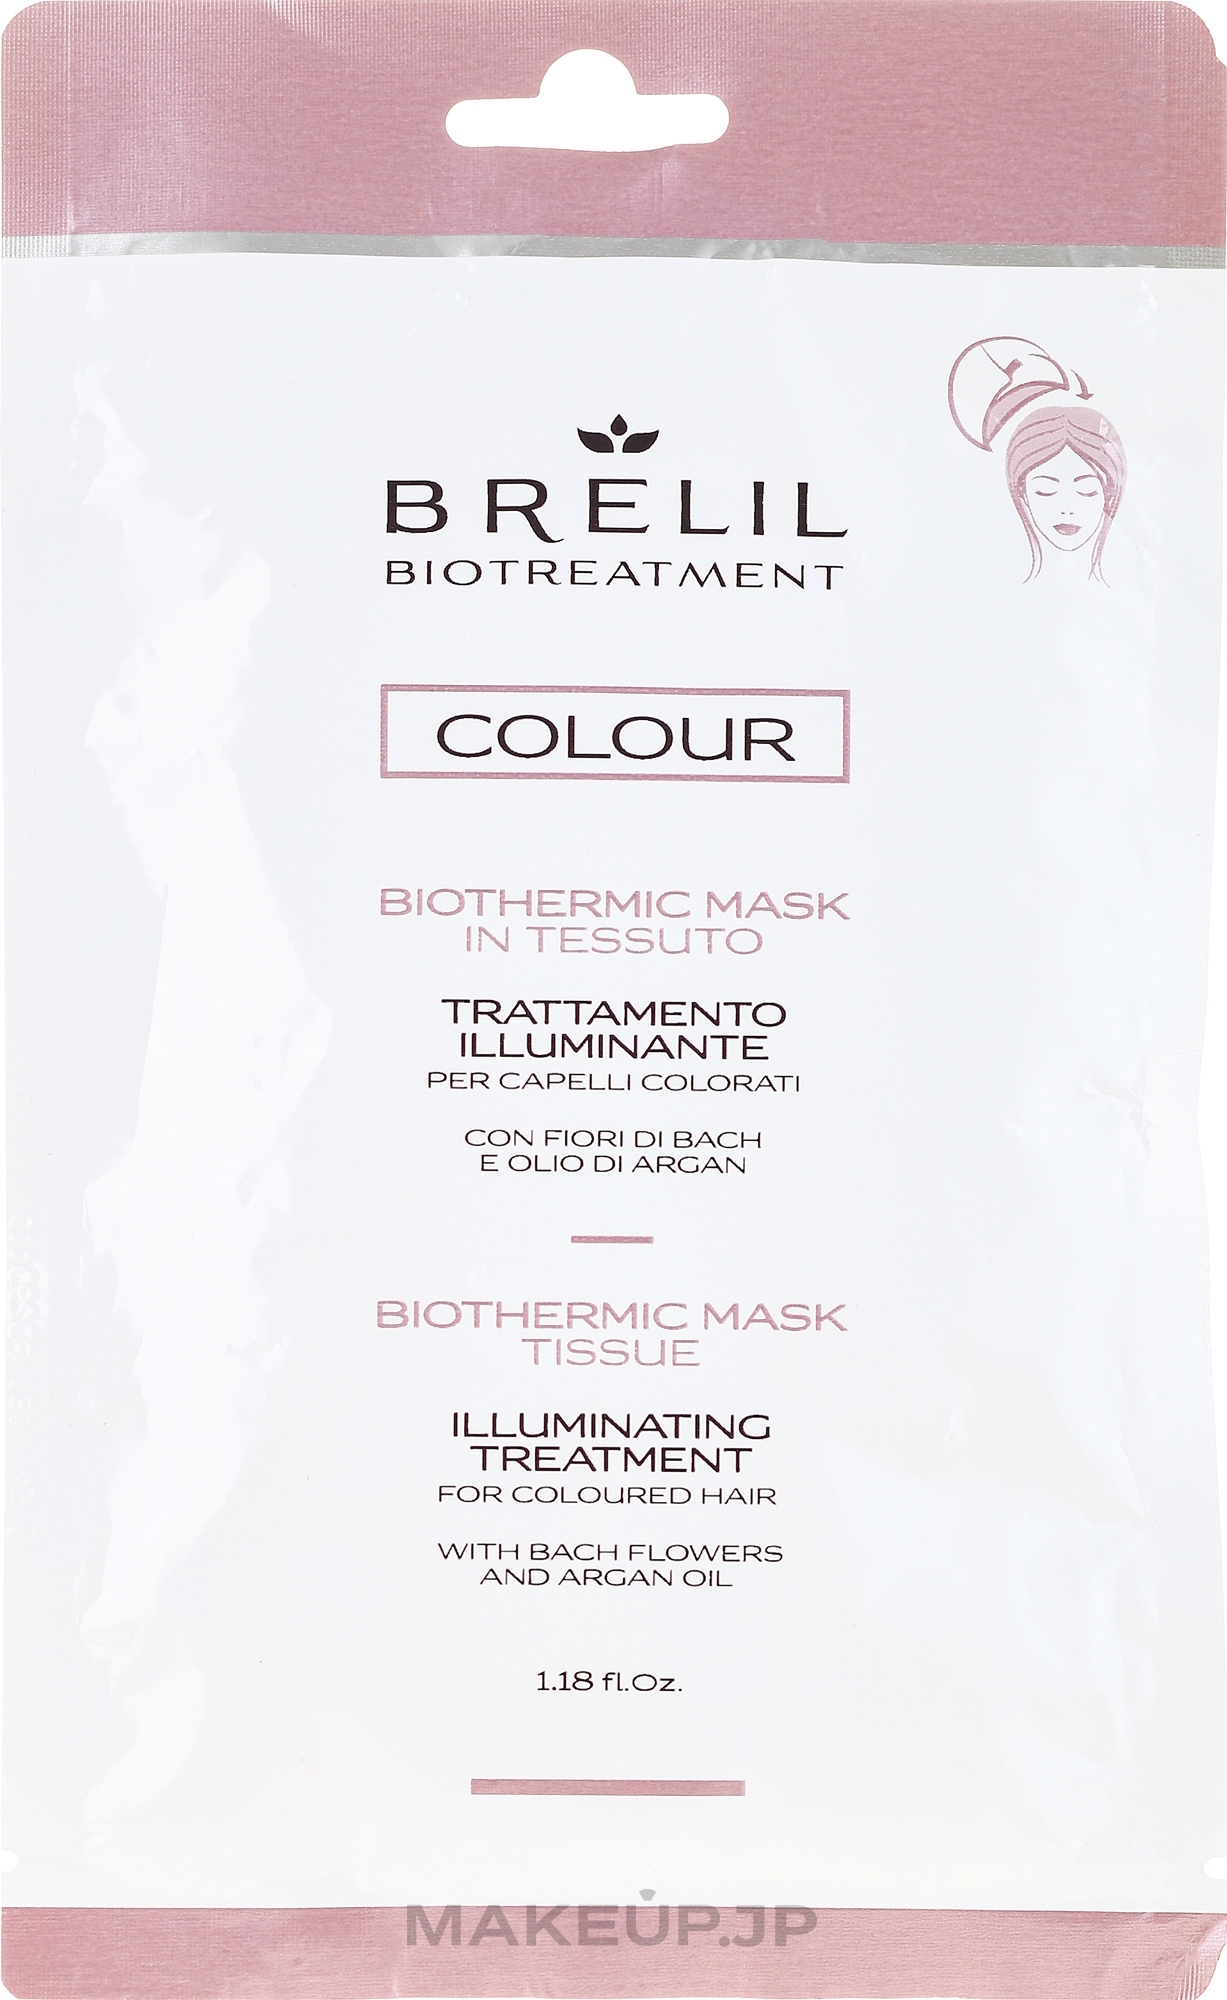 Express Mask for Colored Hair - Brelil Bio Treatment Colour Biothermic Mask Tissue — photo 35 ml